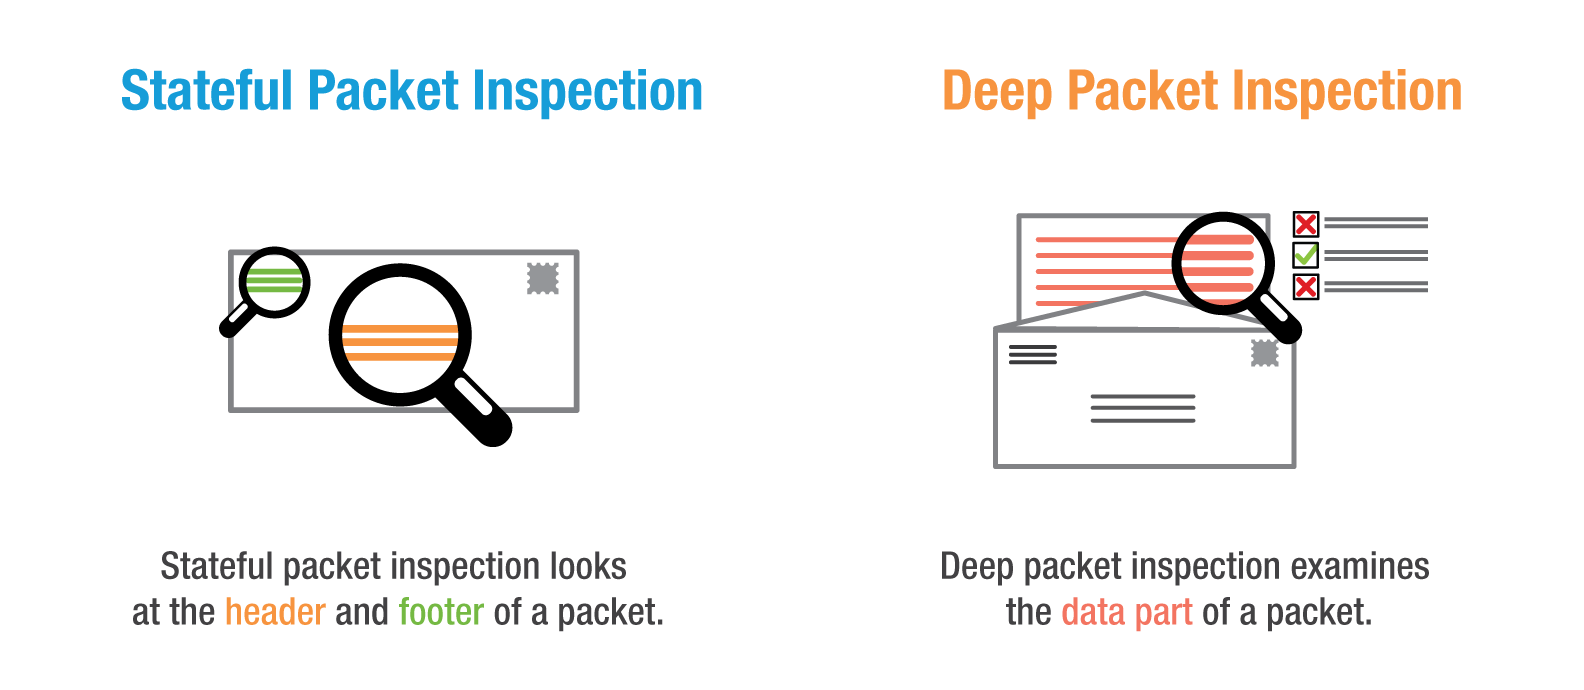 Stateful Packet Inspection vs. Deep Packet Inspection